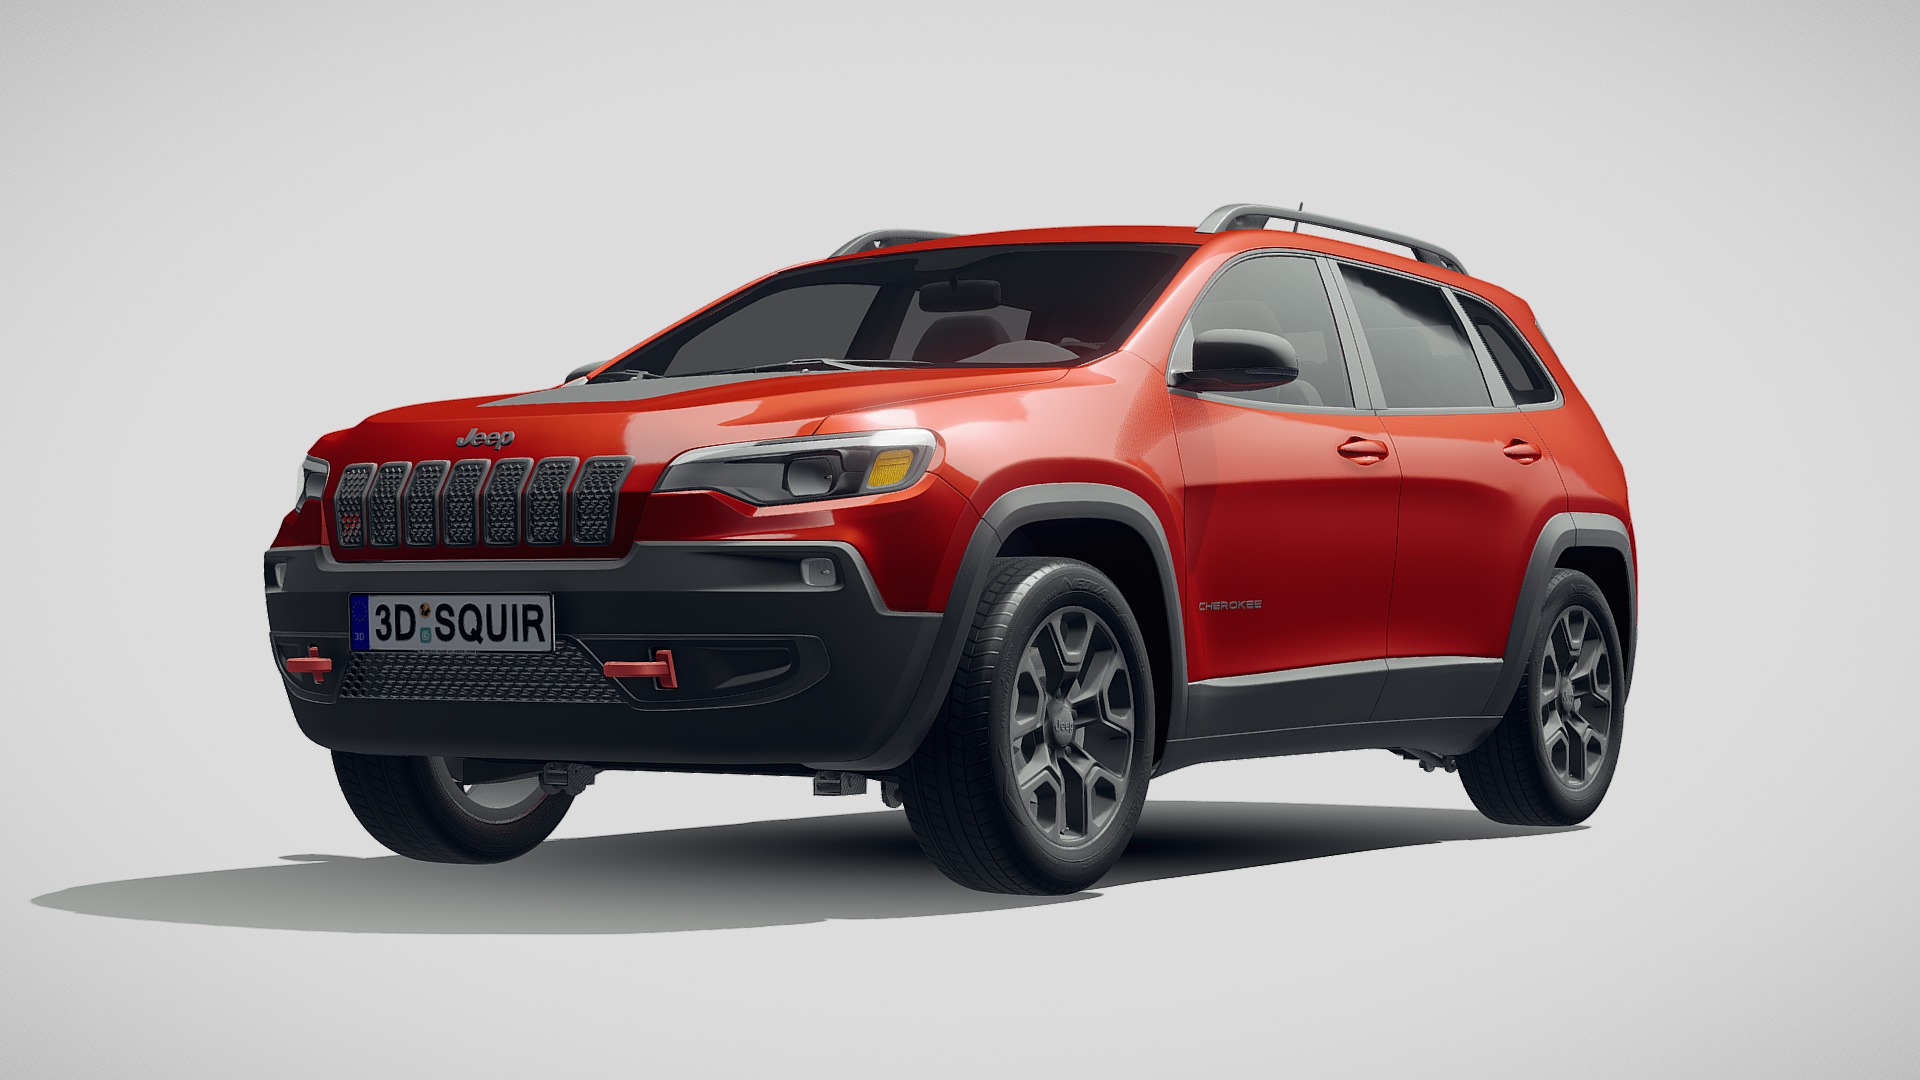 3D model Jeep Cherokee 2019 - This is a 3D model of the Jeep Cherokee 2019. The 3D model is about a red car with a white background.